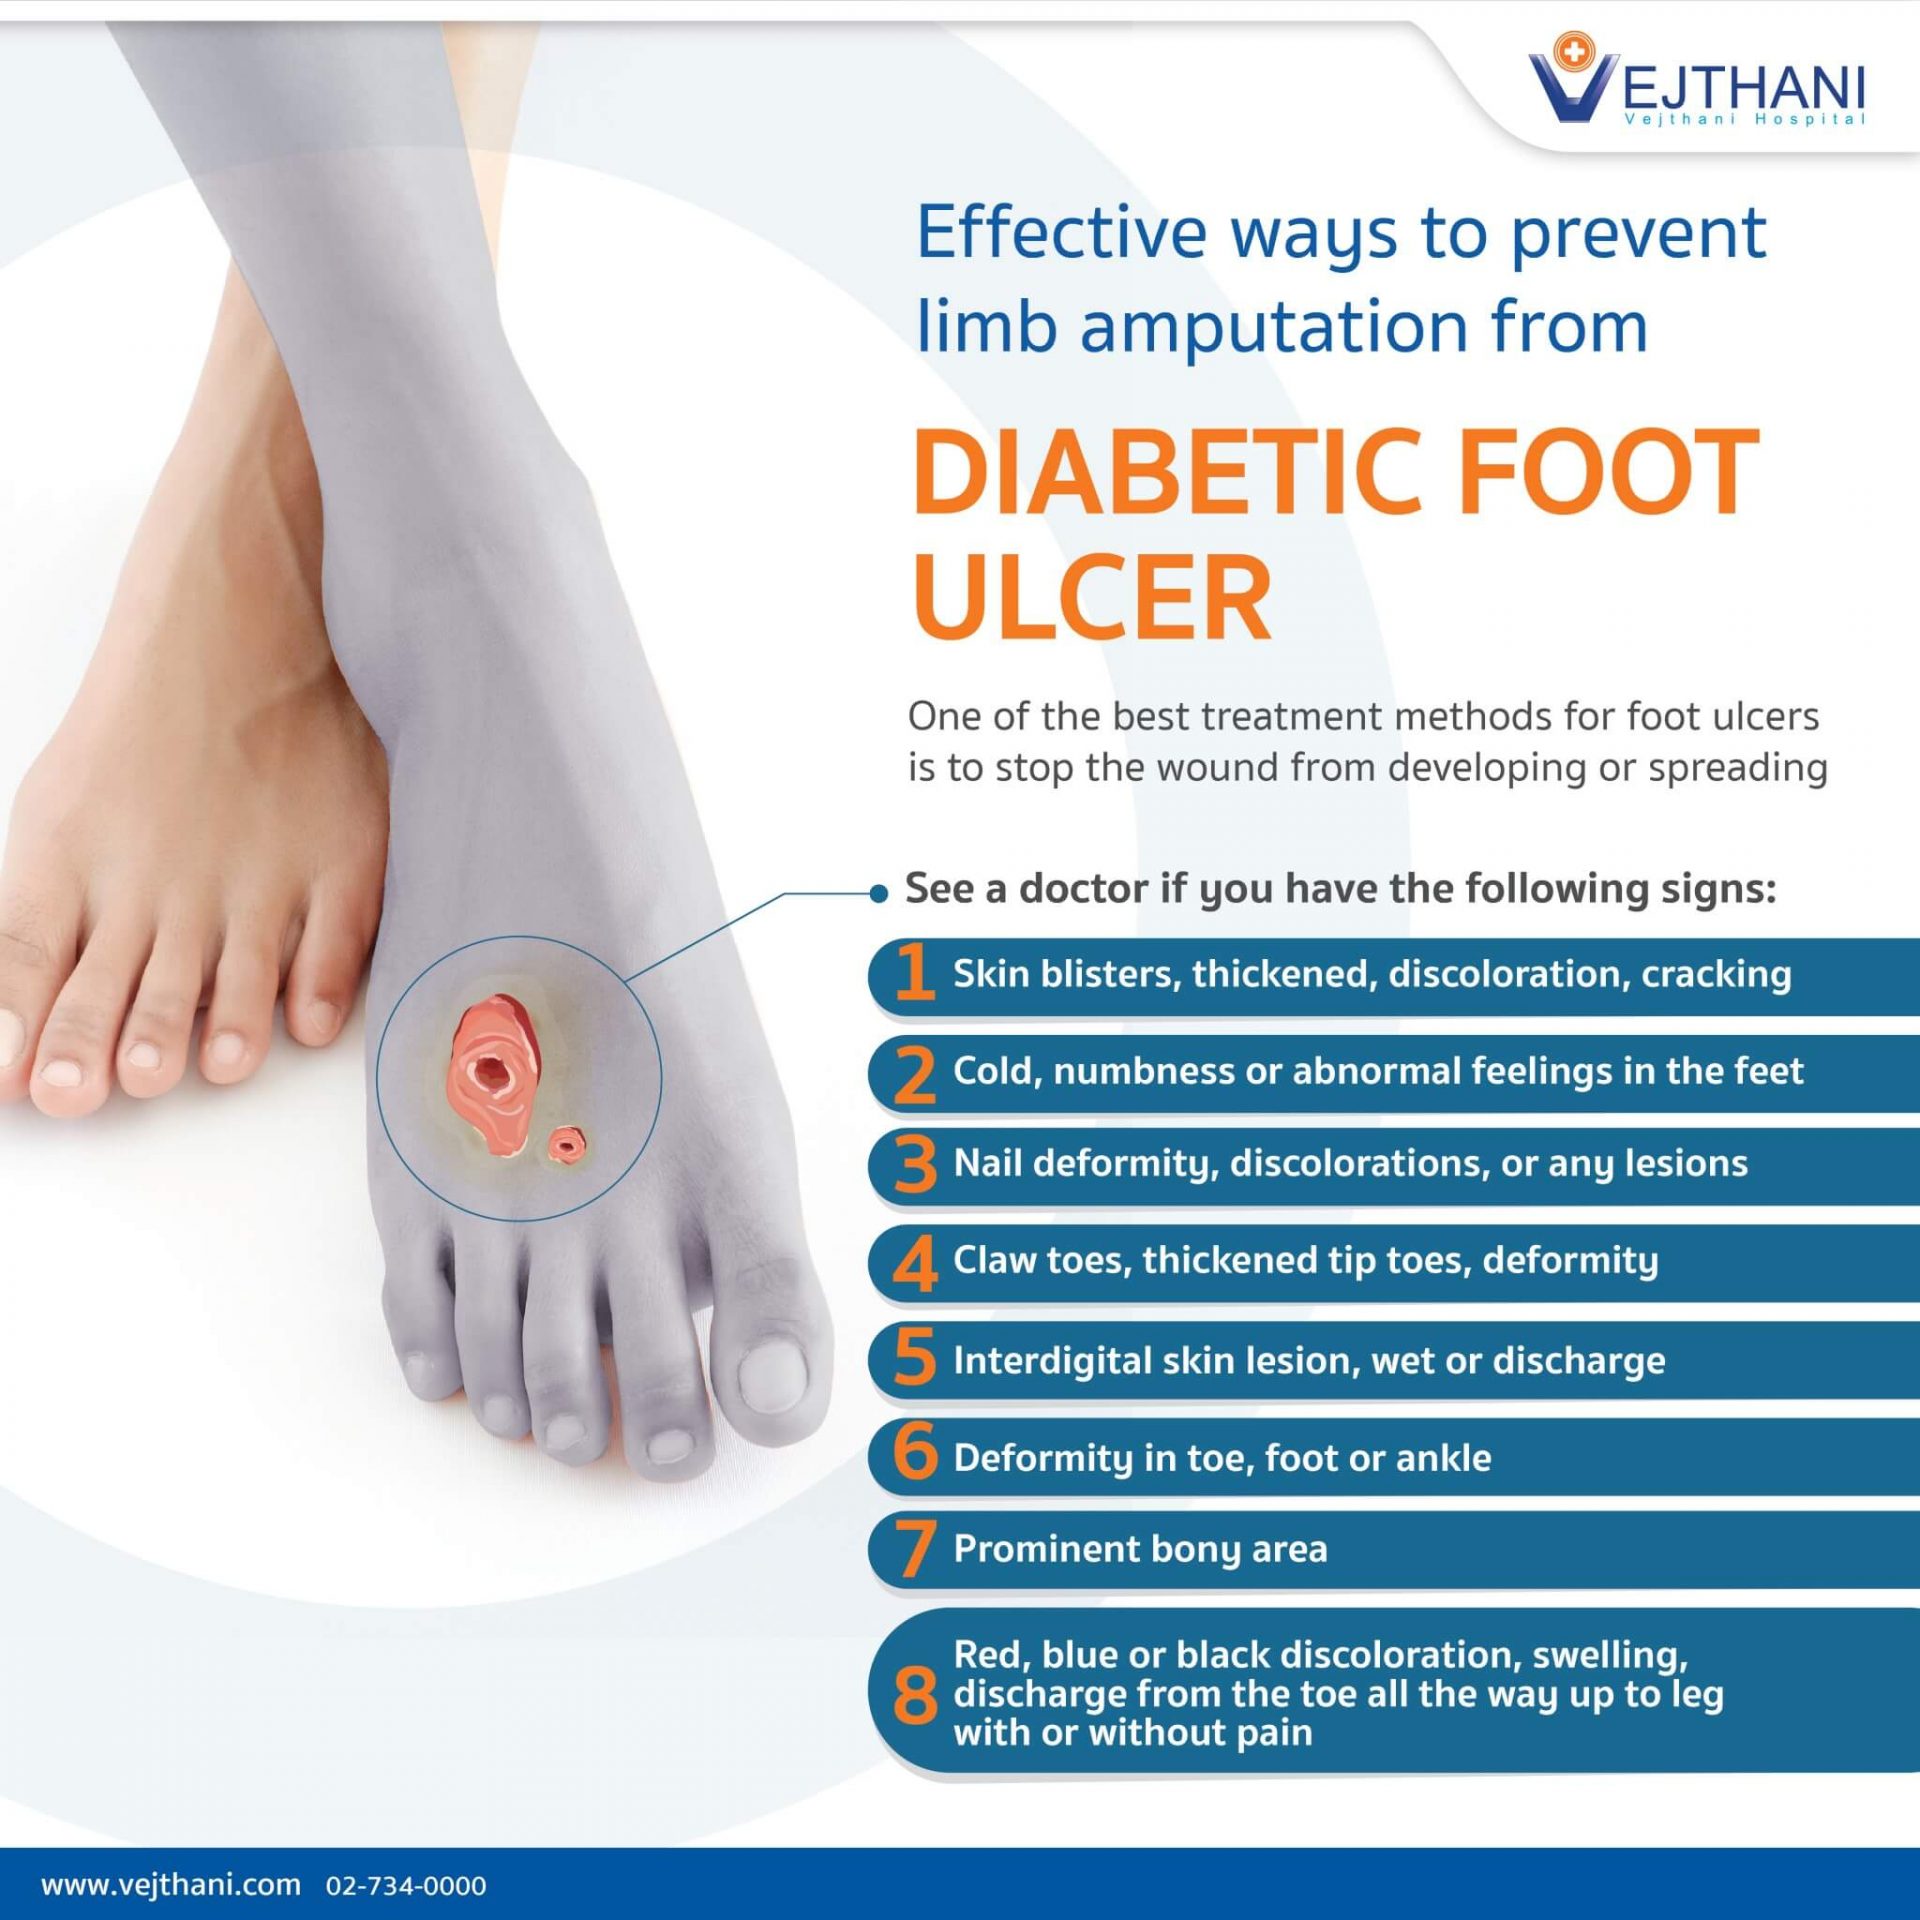 What Types of Stеm Cеlls Arе Usеd in Thе Trеatmеnt of Diabetic Foot Ulcers?